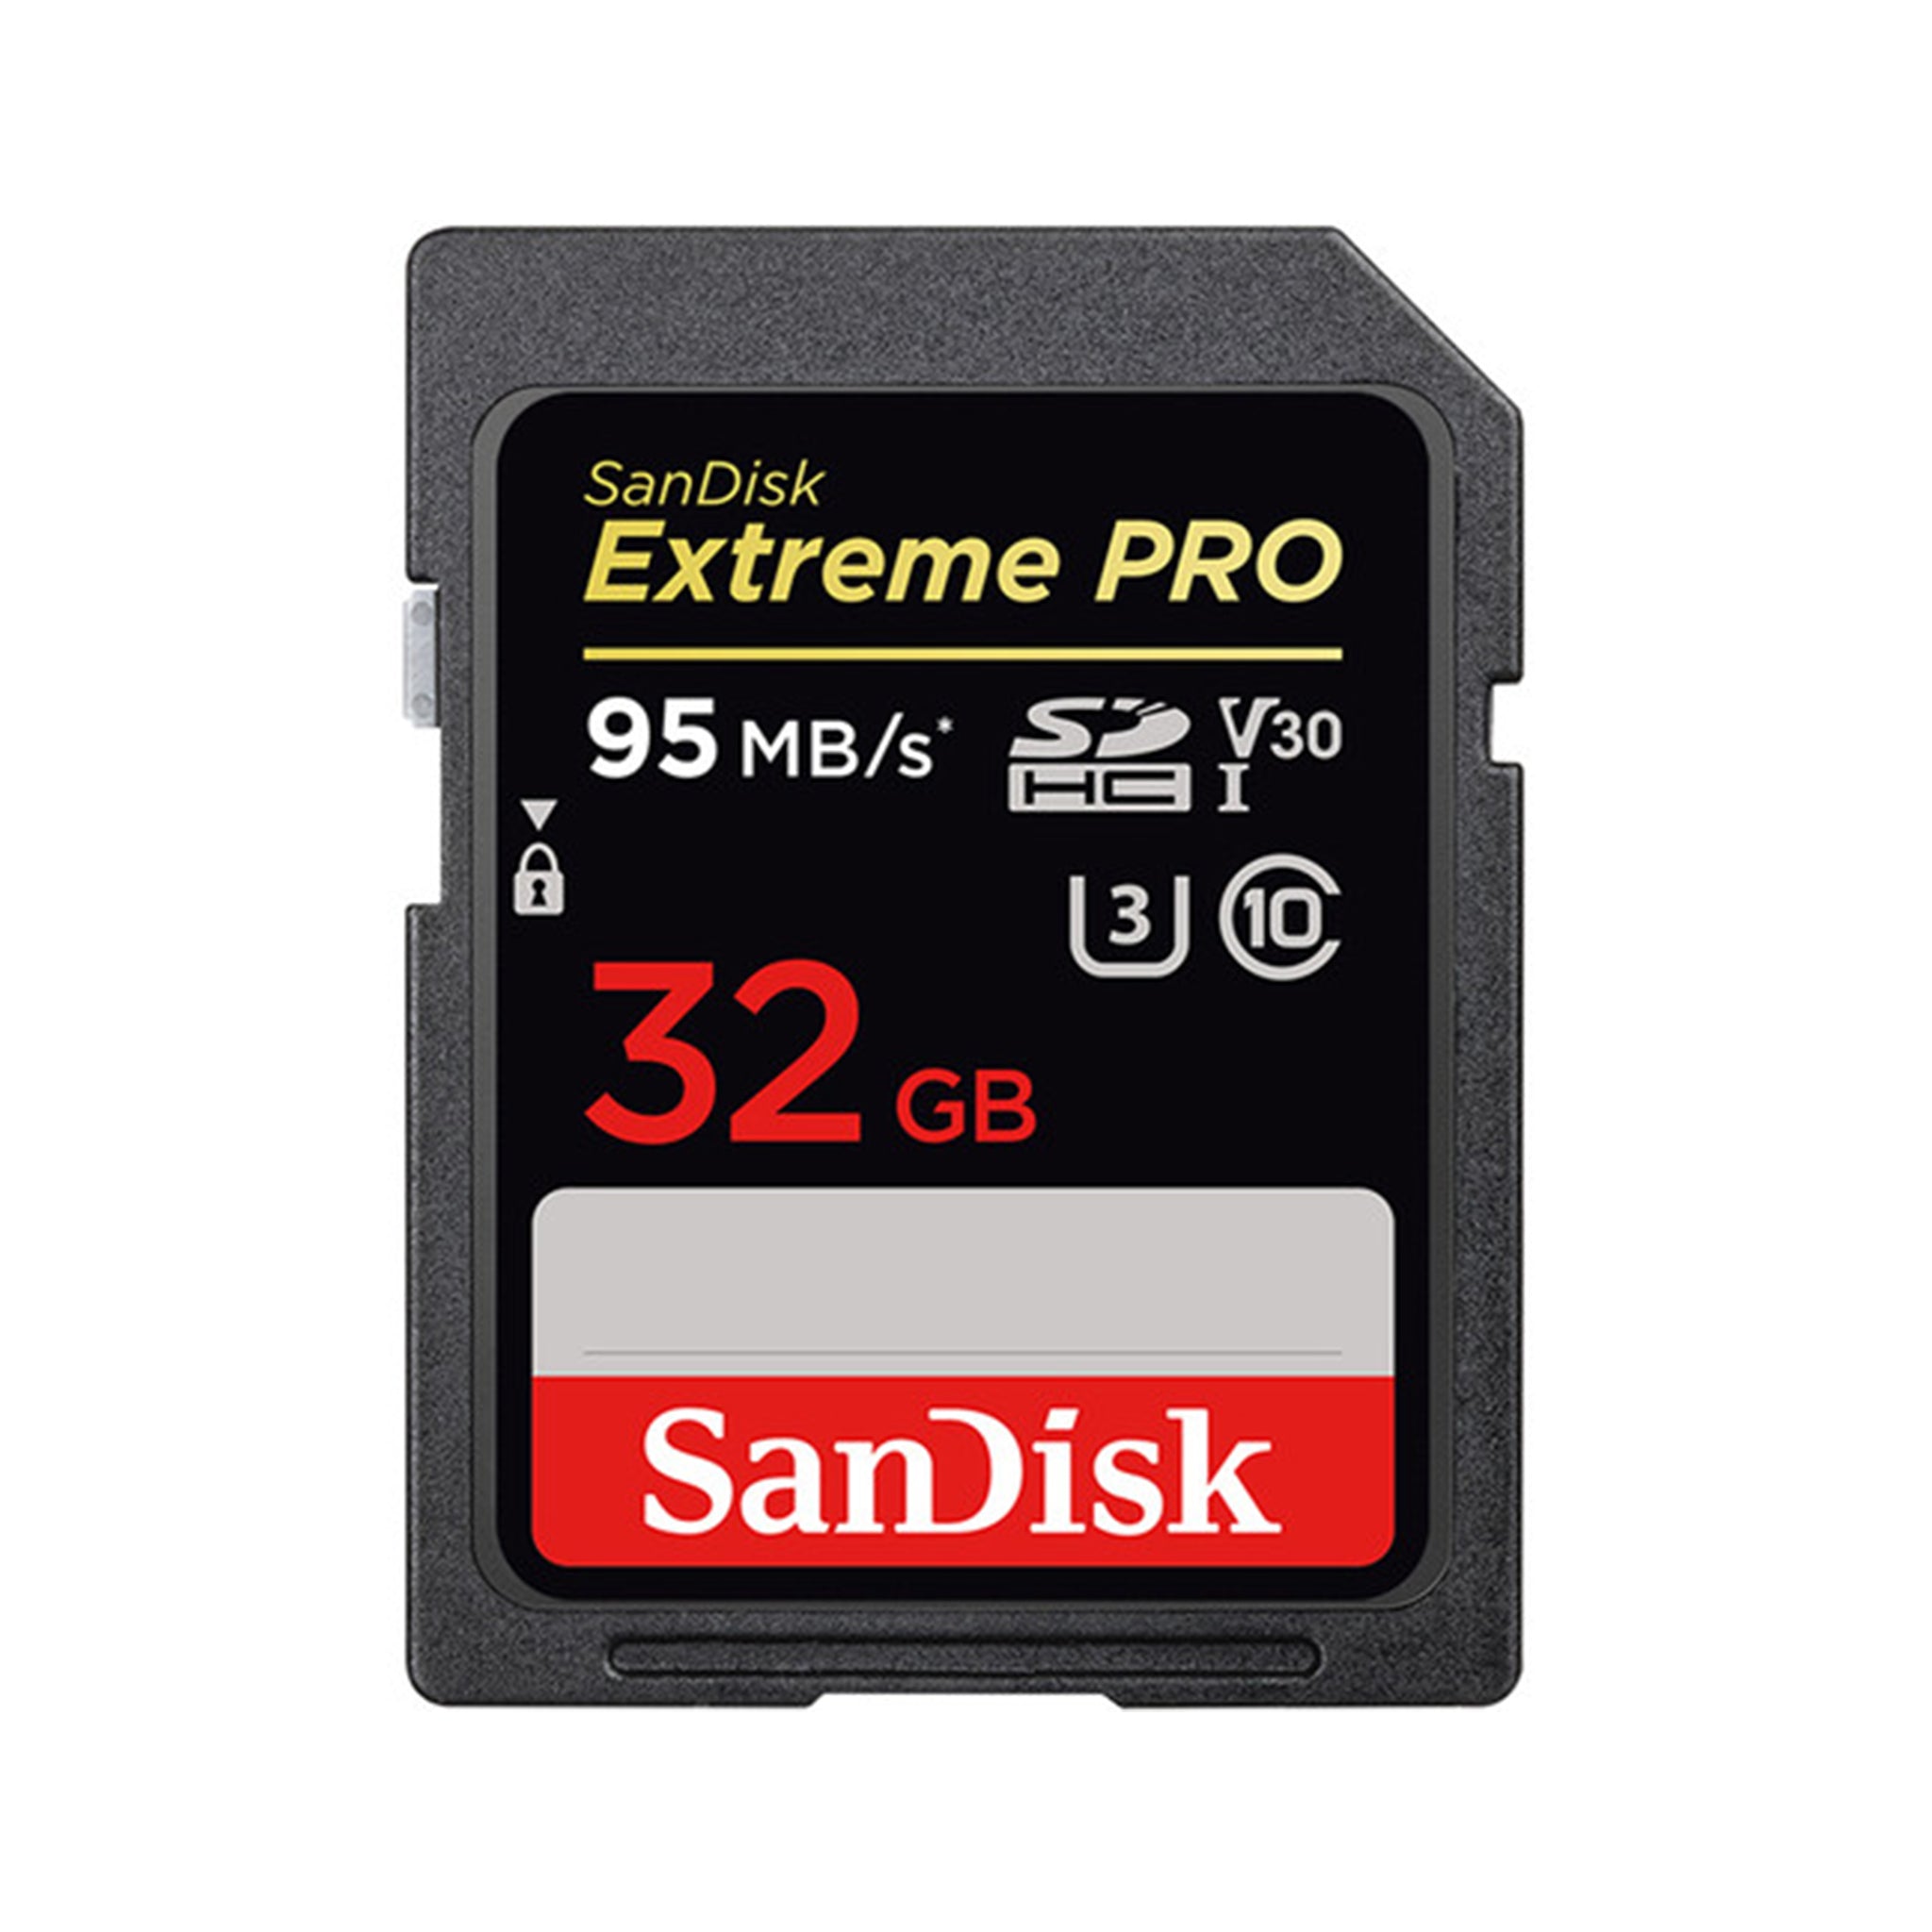 SanDisk 32GB Extreme Pro SD Card